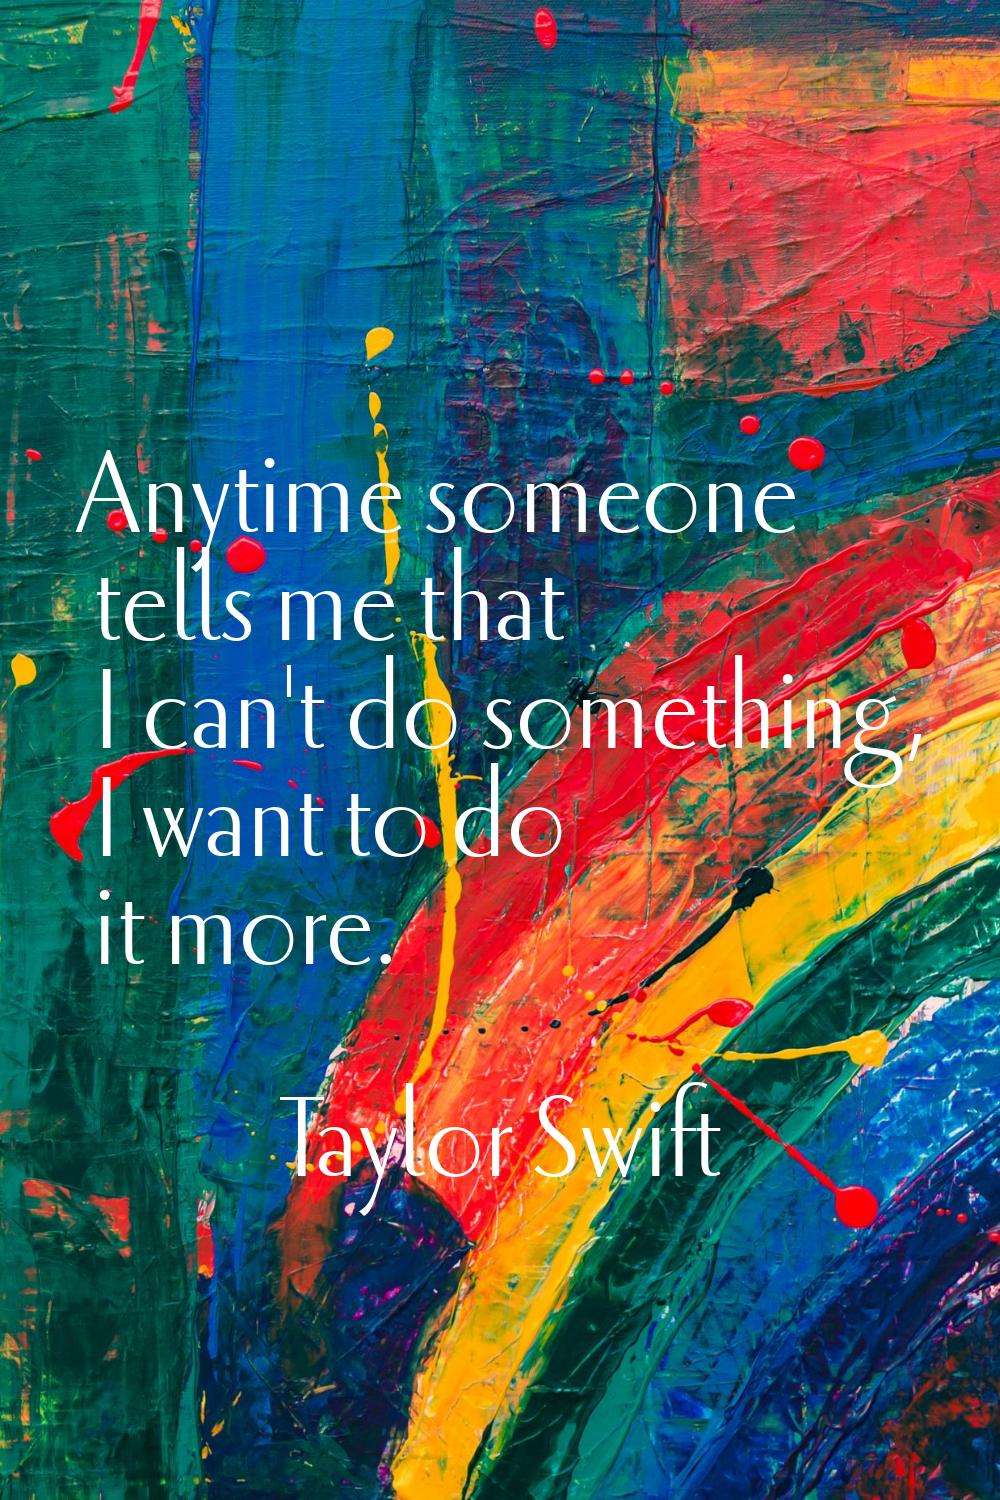 Anytime someone tells me that I can't do something, I want to do it more.